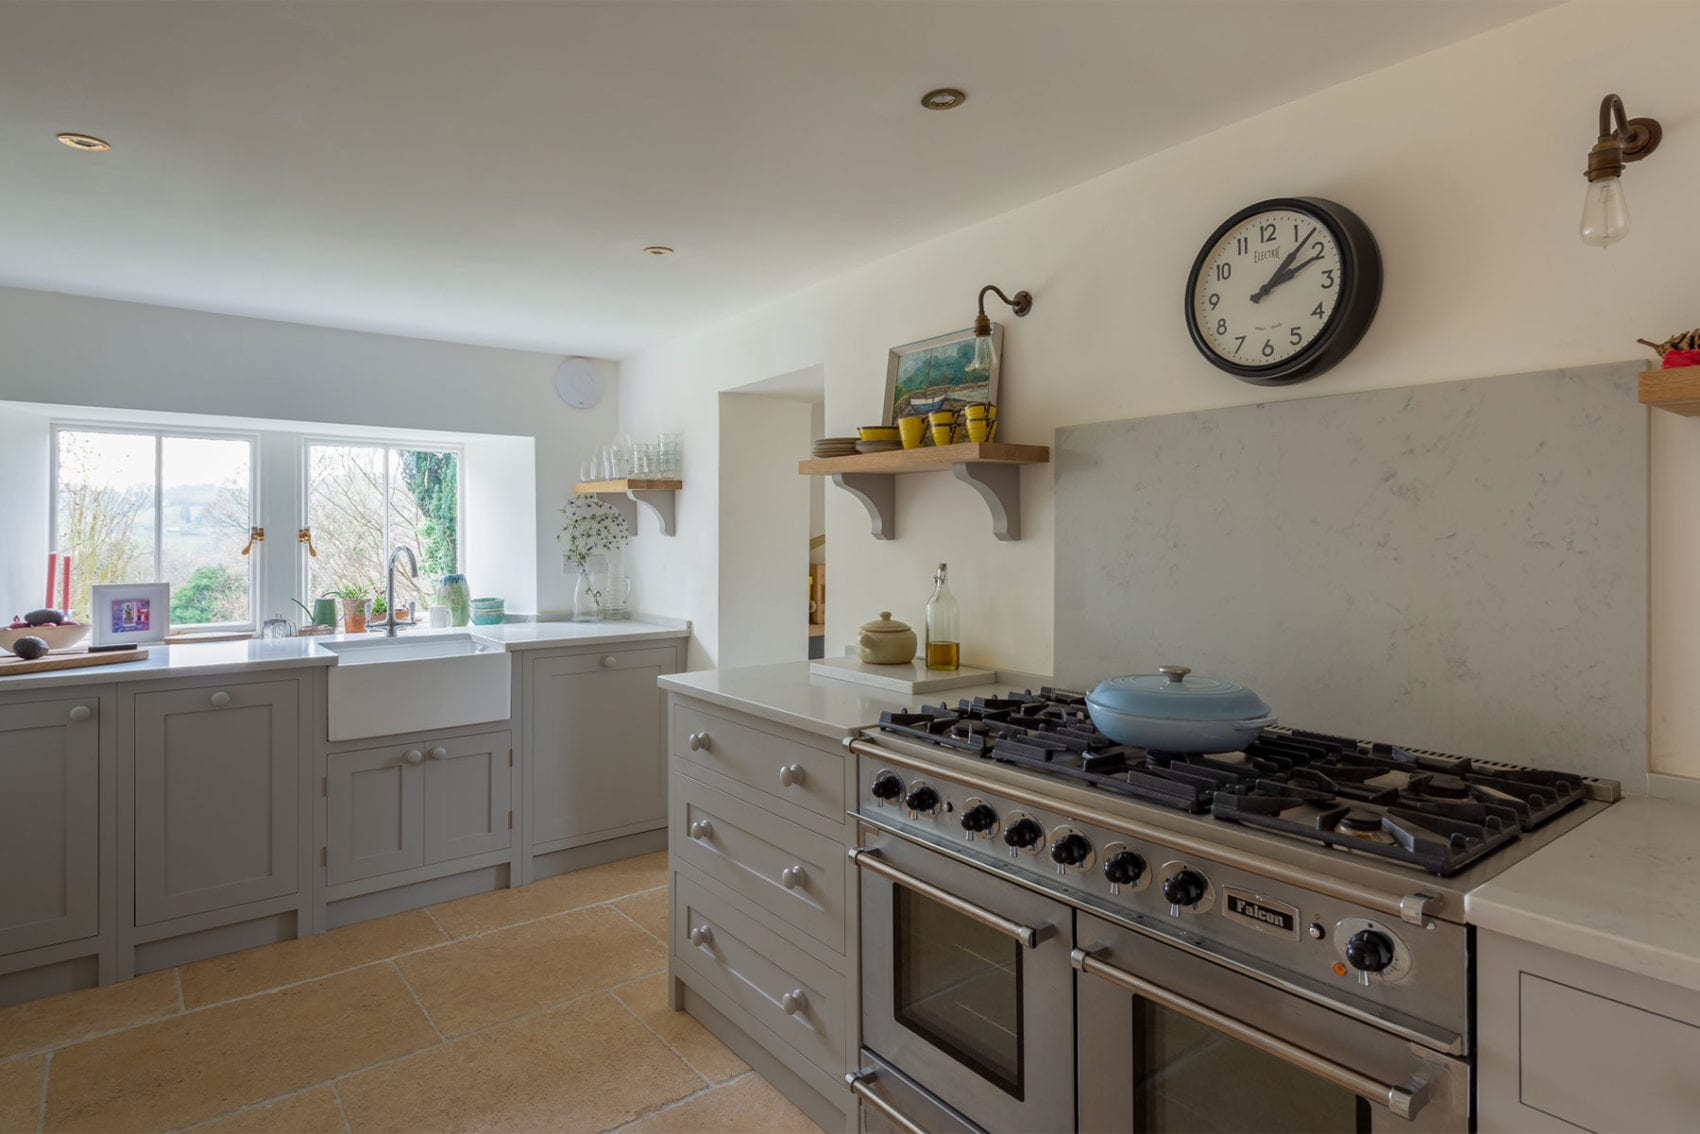 A Light grey shaker kitchen design with white walls and large oven